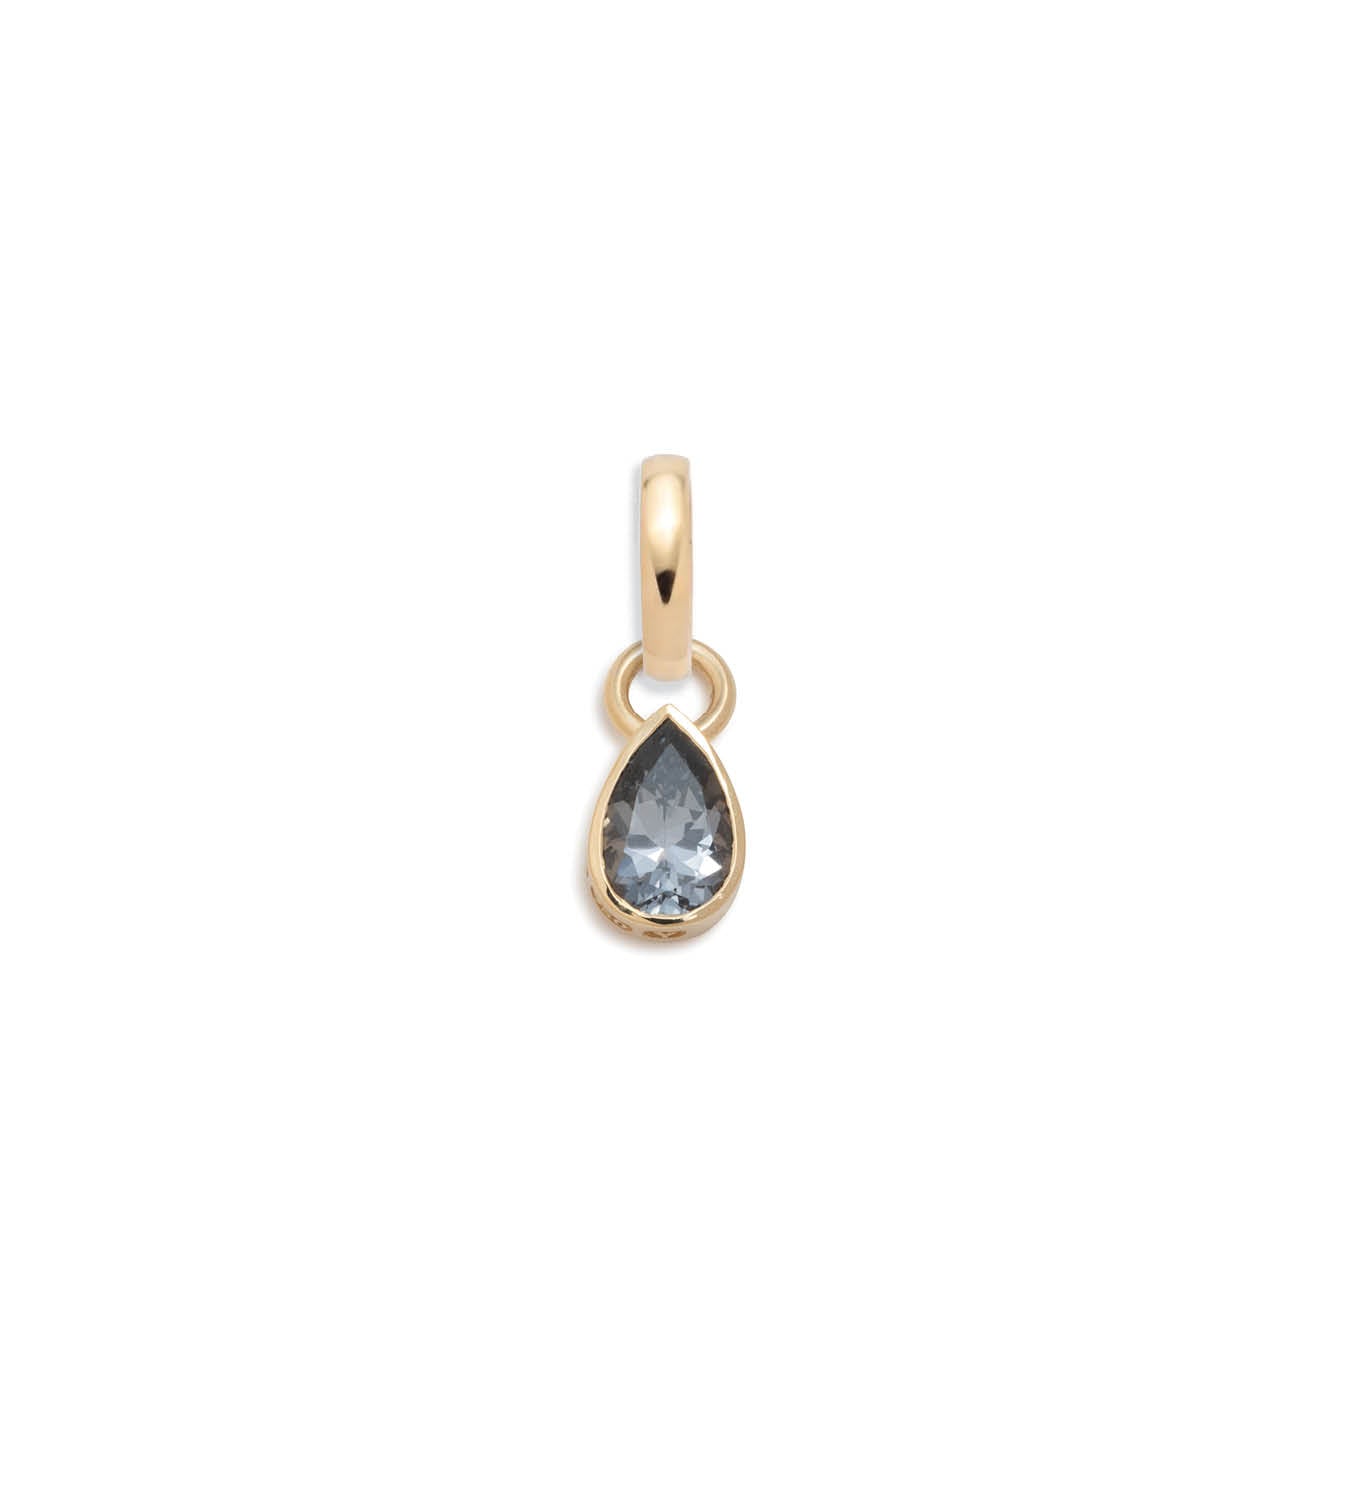 Forever & Always a Pair - Love : .8ct Grey Spinel Pear Pendant with Oval Pushgate